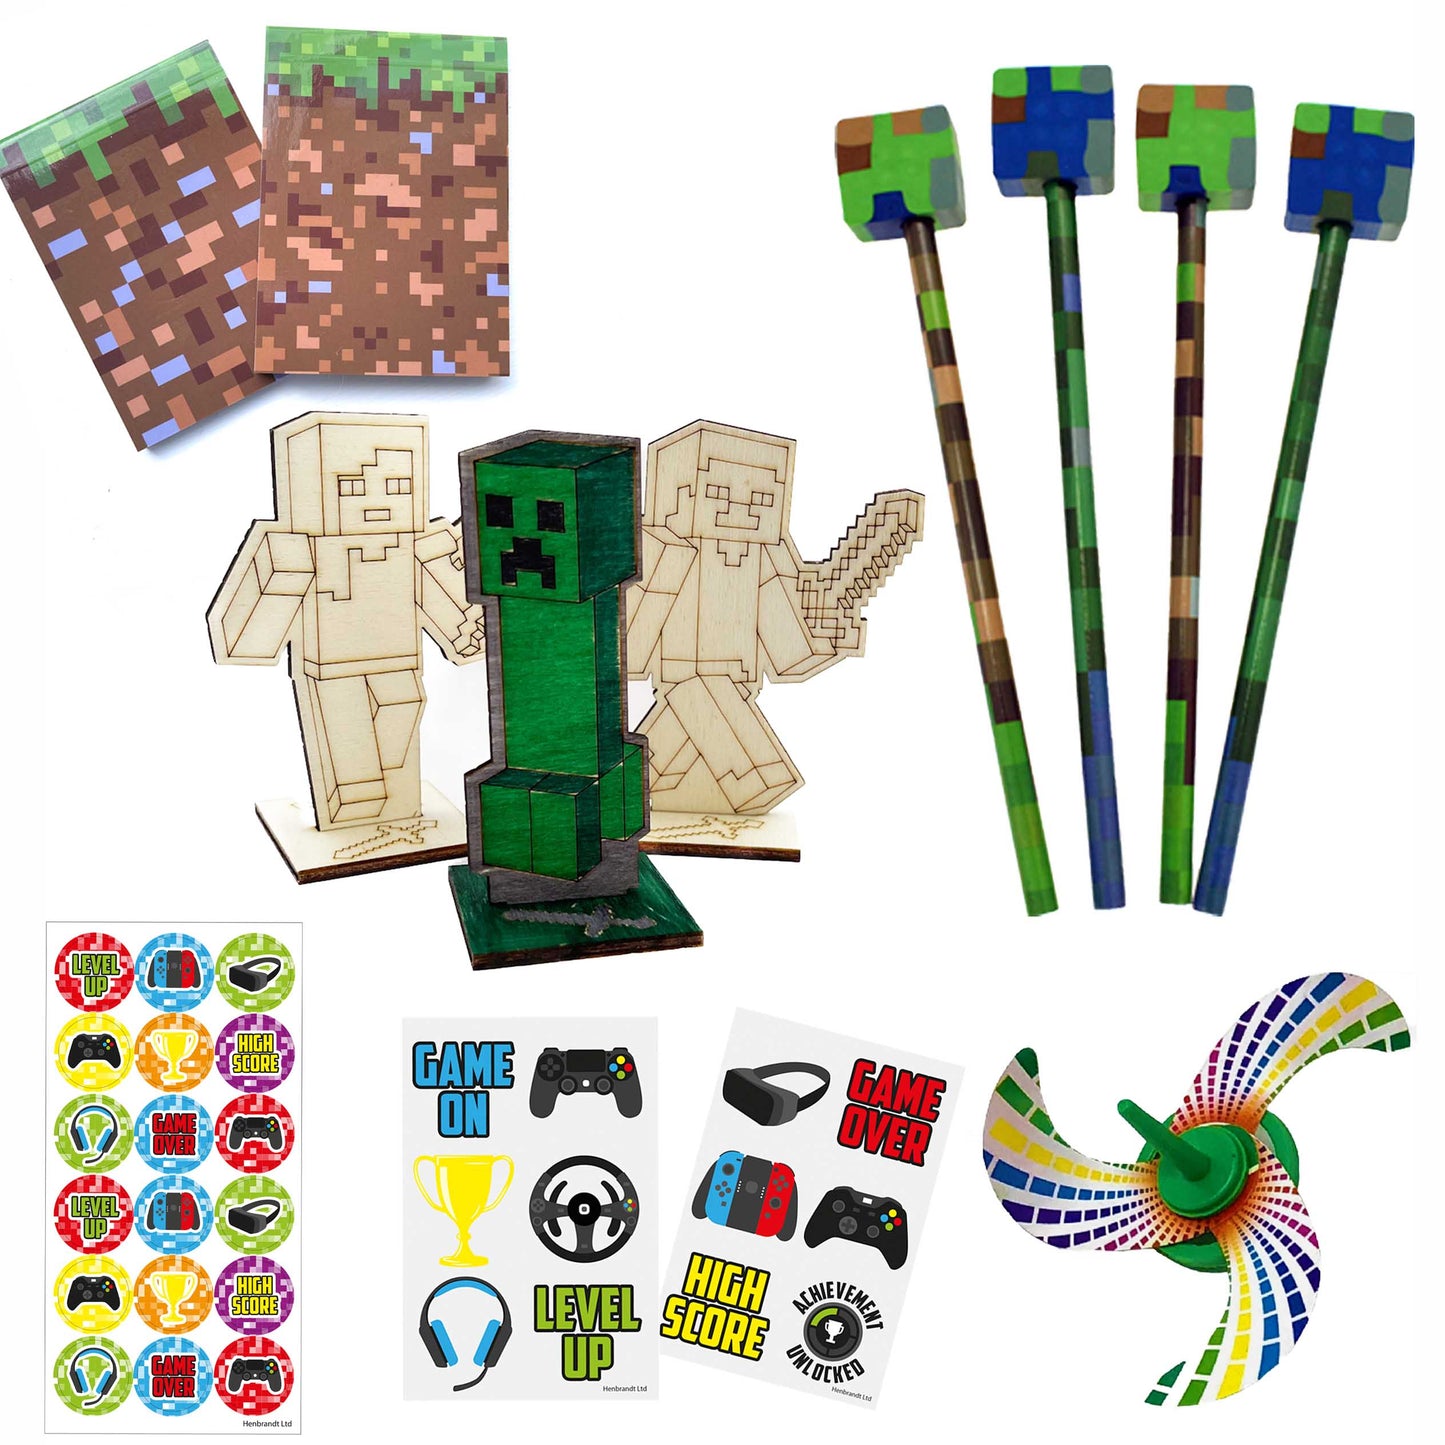 The Gamer Party Bag - Miner